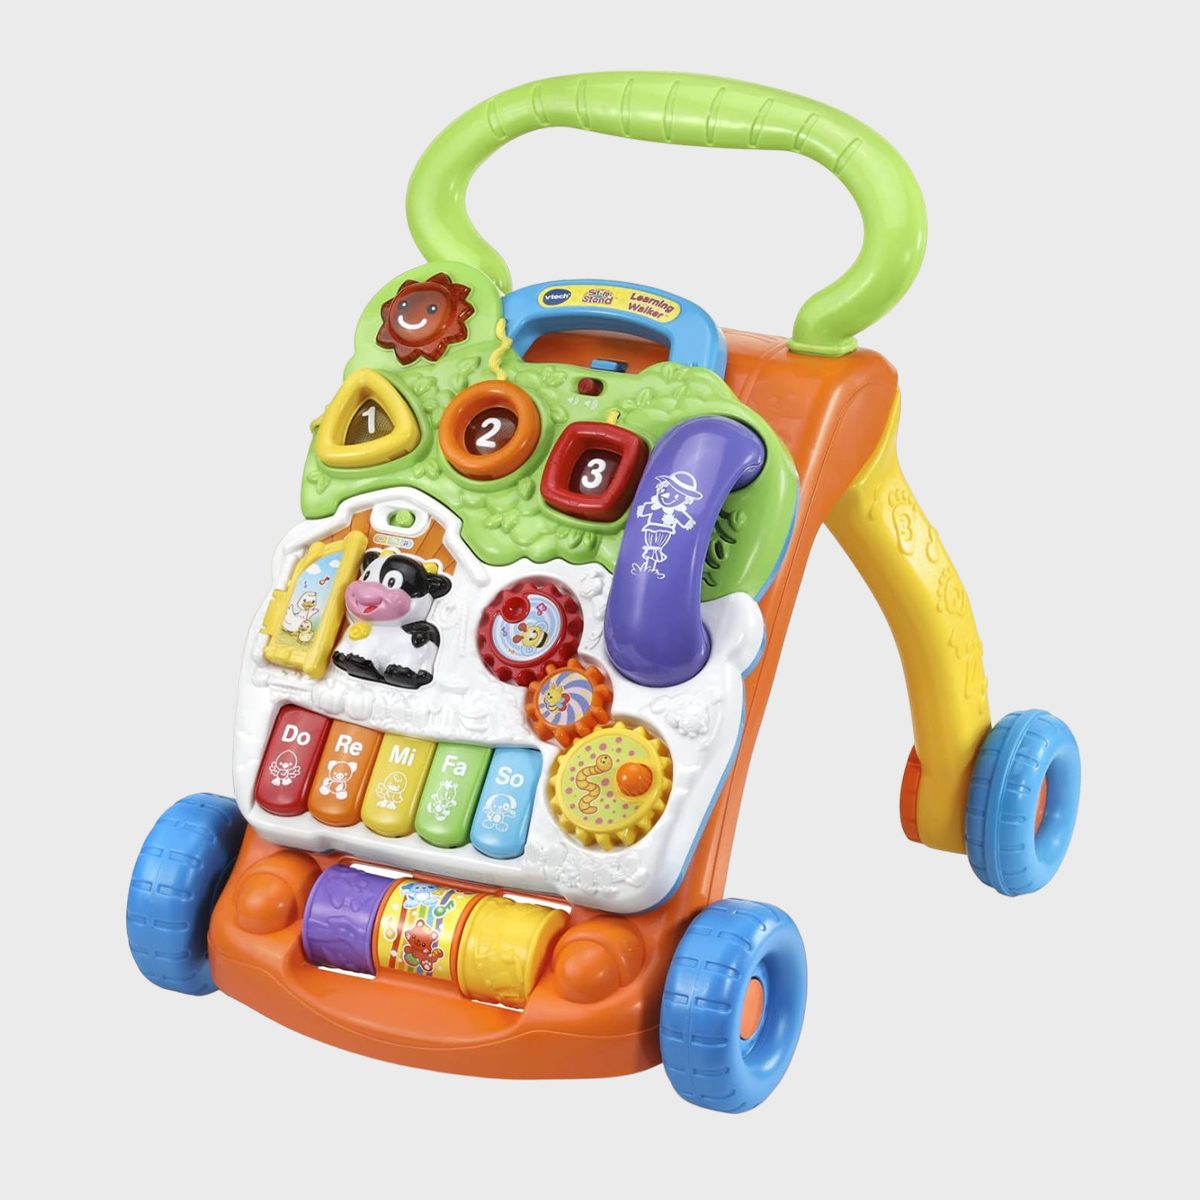 <p>This brightly-hued <a href="https://www.amazon.com/VTech-Stand-Learning-Frustration-Packaging/dp/B0053X62GK" rel="nofollow noopener noreferrer">learning walker</a> is one of the best toys for babies in their first year because it offers stimulation for so many senses. Babies will enjoy it whether sitting (from about six months on) or standing as babies start to pull themselves up and try walking when they're closer to a year old. It's also an <a href="https://www.rd.com/list/things-you-should-always-buy-on-amazon/" rel="noopener noreferrer">Amazon bestseller</a> and boasts a whopping 77,000 five-star ratings (and counting) and a nearly perfect 4.8-star average.</p> <p class="listicle-page__cta-button-shop"><a class="shop-btn" href="https://www.amazon.com/VTech-Stand-Learning-Frustration-Packaging/dp/B0053X62GK">Shop Now</a></p>